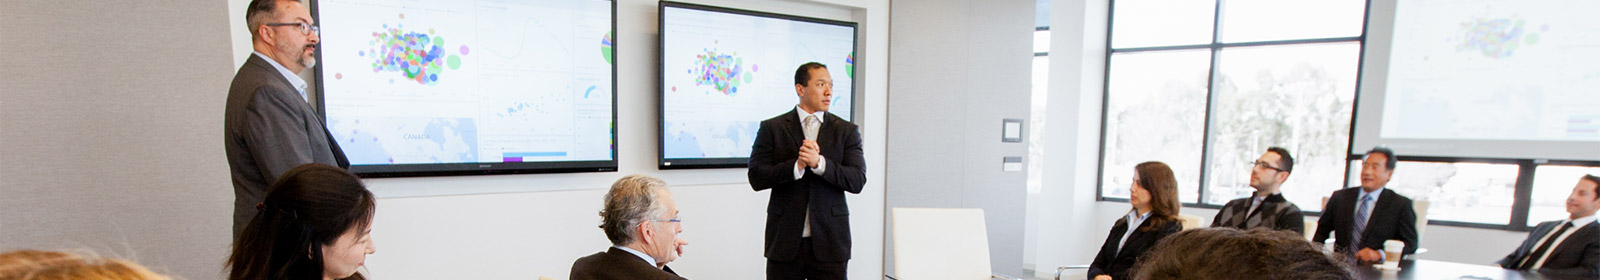 Two men presenting during a meeting